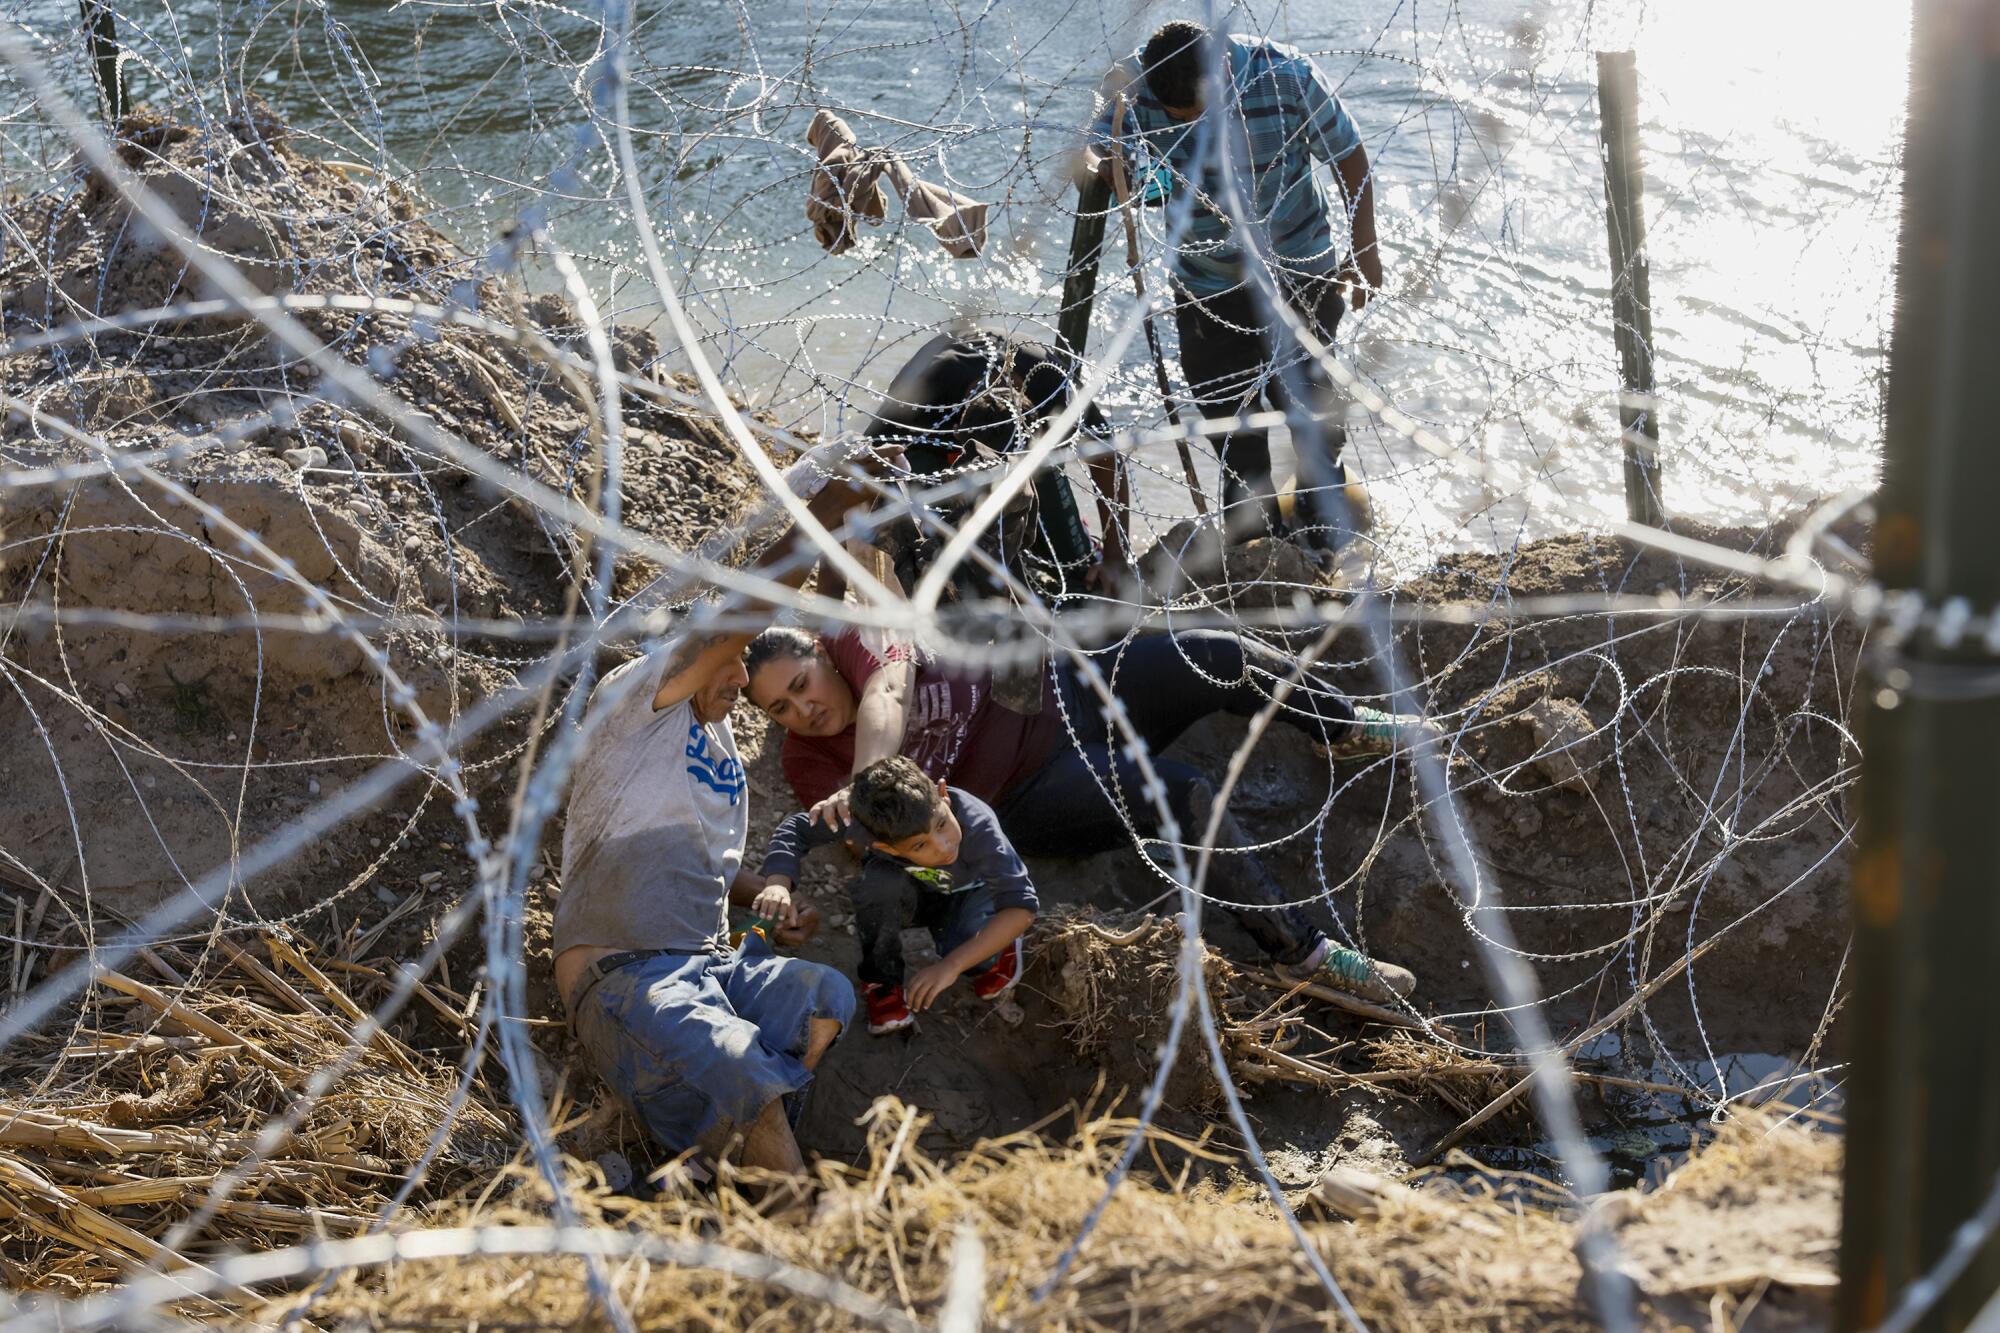 A man lifts up a snarl of razor wire so his young son and wife can crawl under as others follow